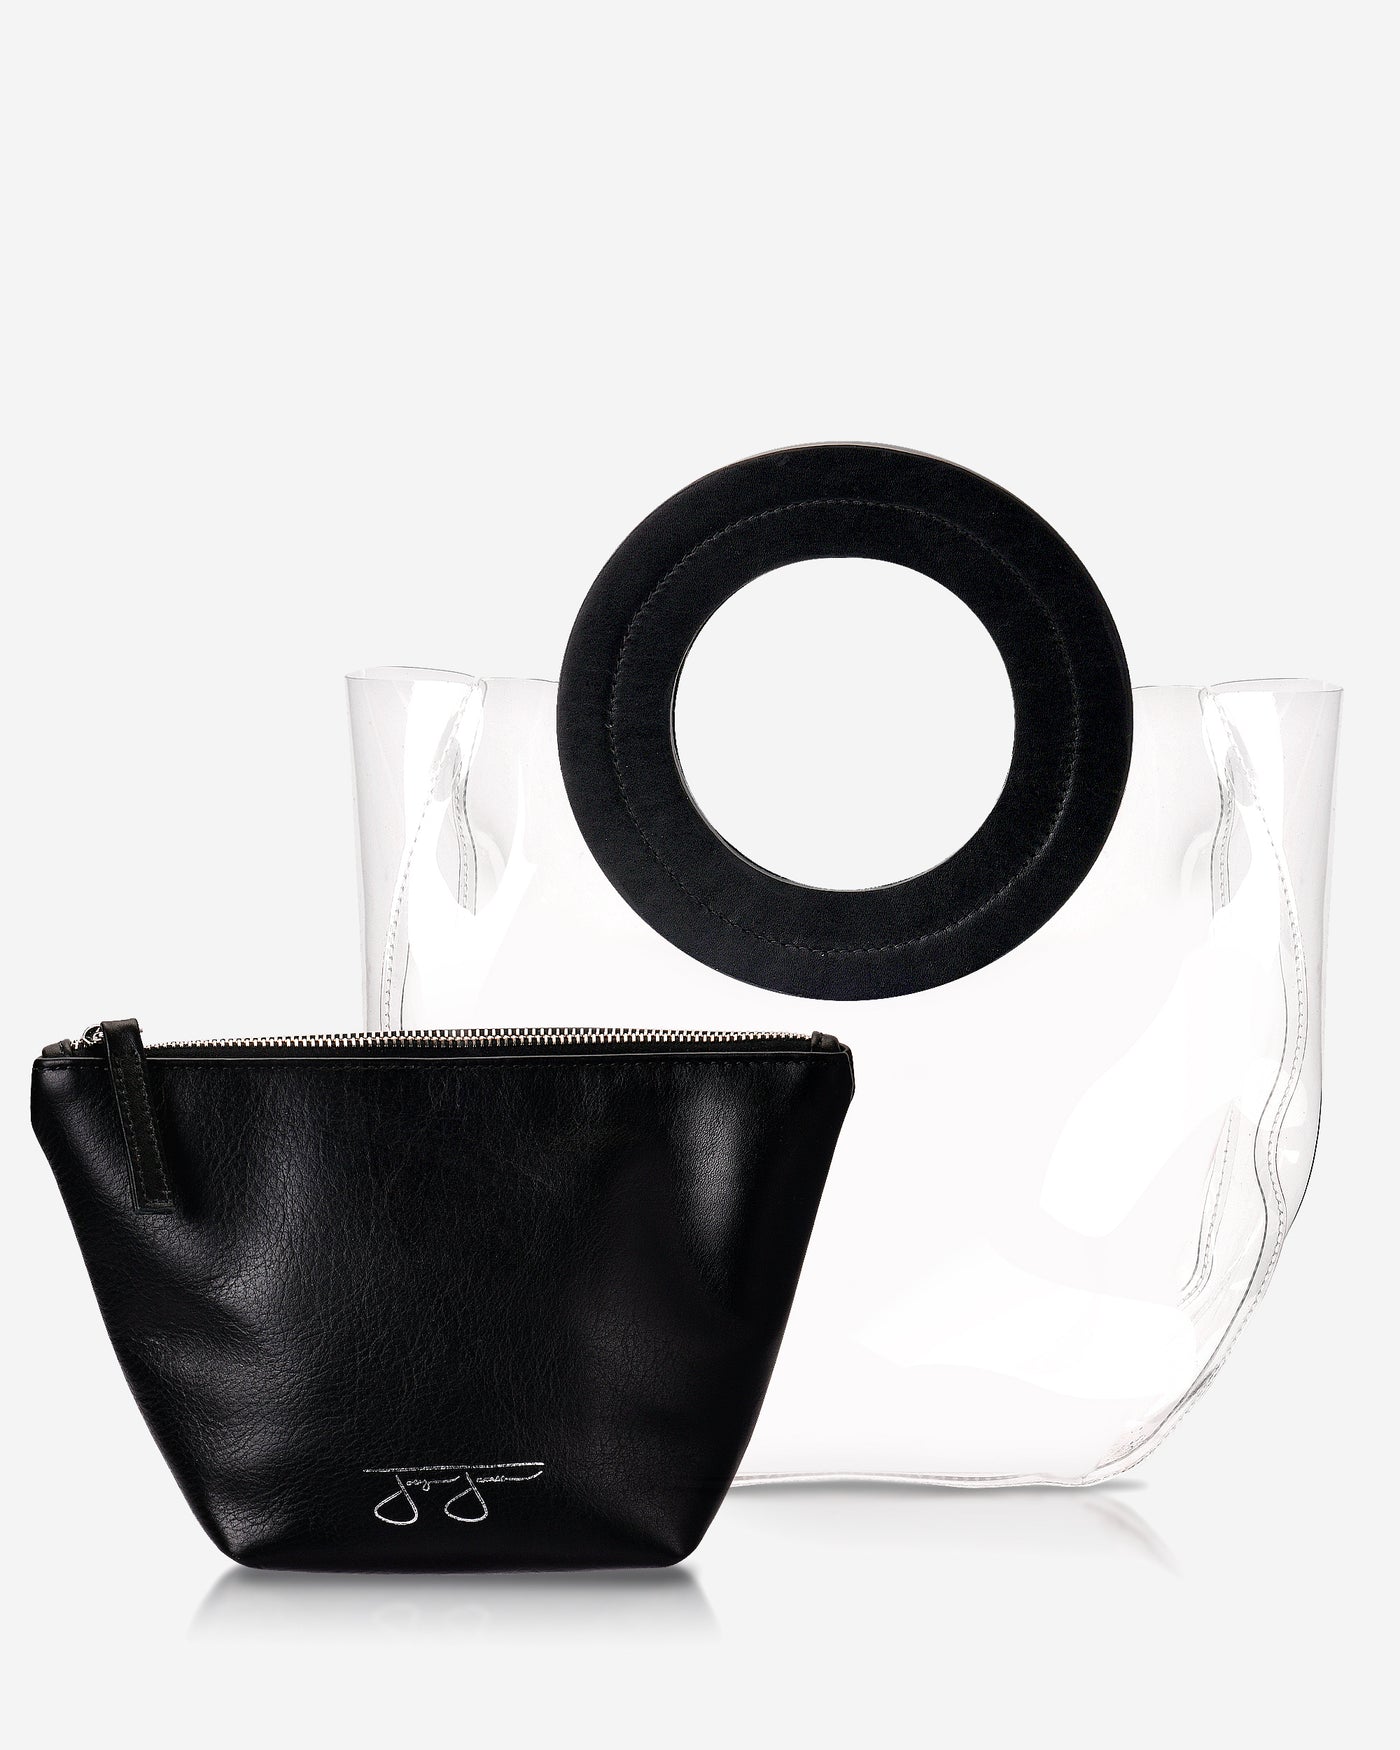 Lacey Bag - Black Lacey Clear Bag Joey James, The Label   